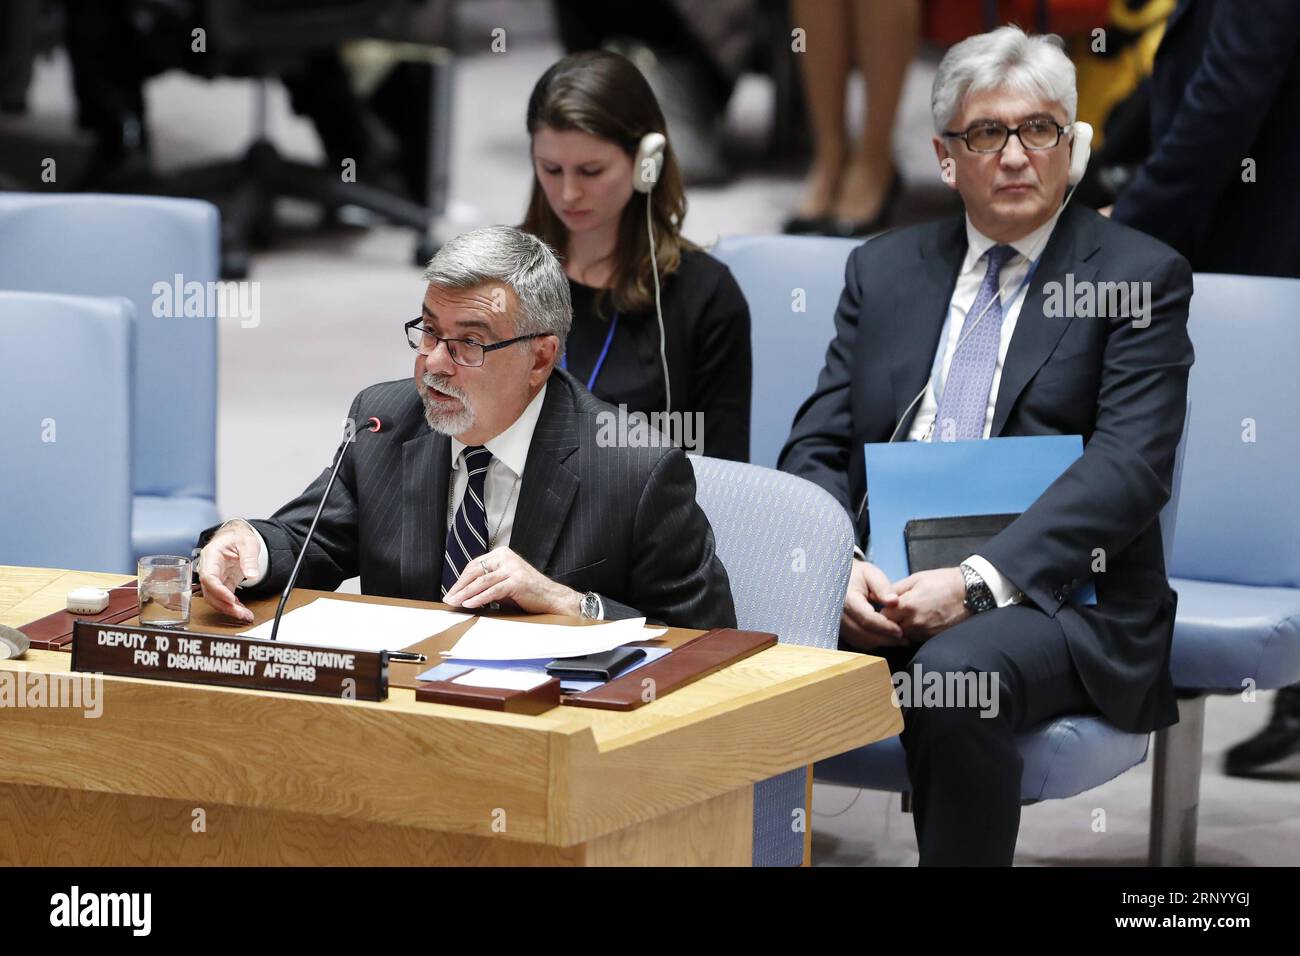 (180409) -- UNITED NATIONS, April 9, 2018 -- Thomas Markram (front), deputy to United Nations Undersecretary-General for Disarmament Affairs Izumi Nakamitsu, briefs the UN Security Council meeting on the situation in Syria at the UN headquarters in New York, April 9, 2018. The Security Council held an emergency session on the situation in Syria, particularly after reports of the use of chemical weapons over the weekend in rebel-held Douma near the capital city of Damascus. ) UN-SECURITY COUNCIL-EMERGENCY SESSION-SYRIA LixMuzi PUBLICATIONxNOTxINxCHN Stock Photo